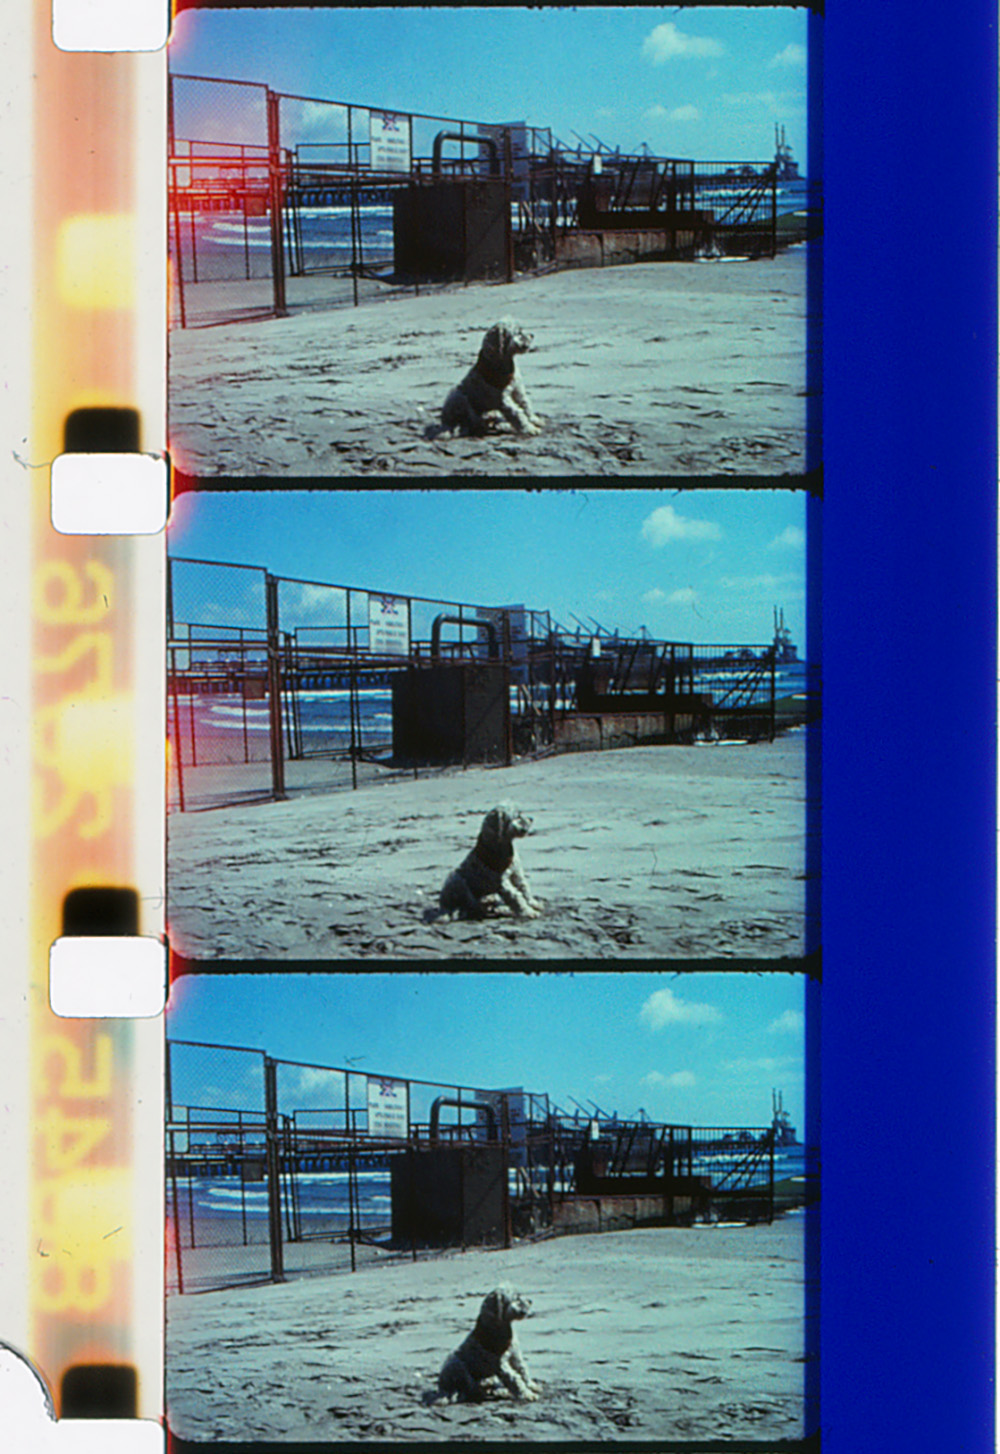 Fragment of a filmogram showing a dog in a beach